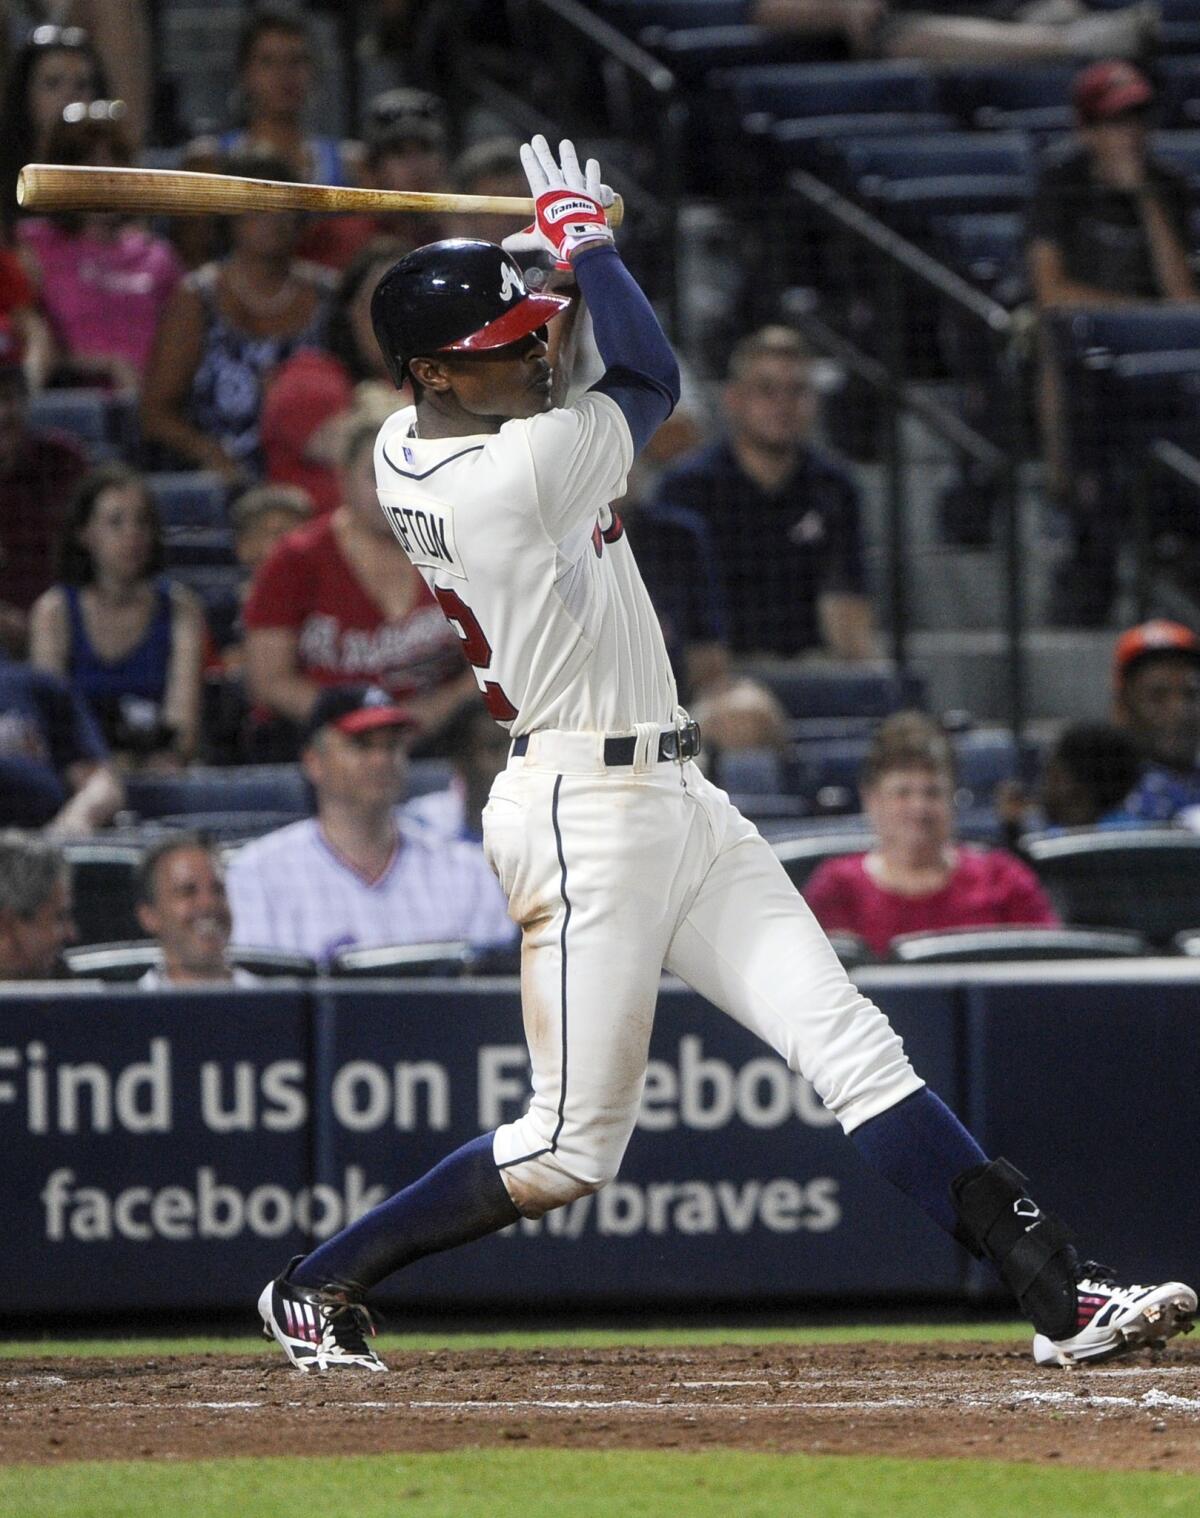 Atlanta Braves outfielder B.J. Upton has struggled mightily at the plate since joining the team.